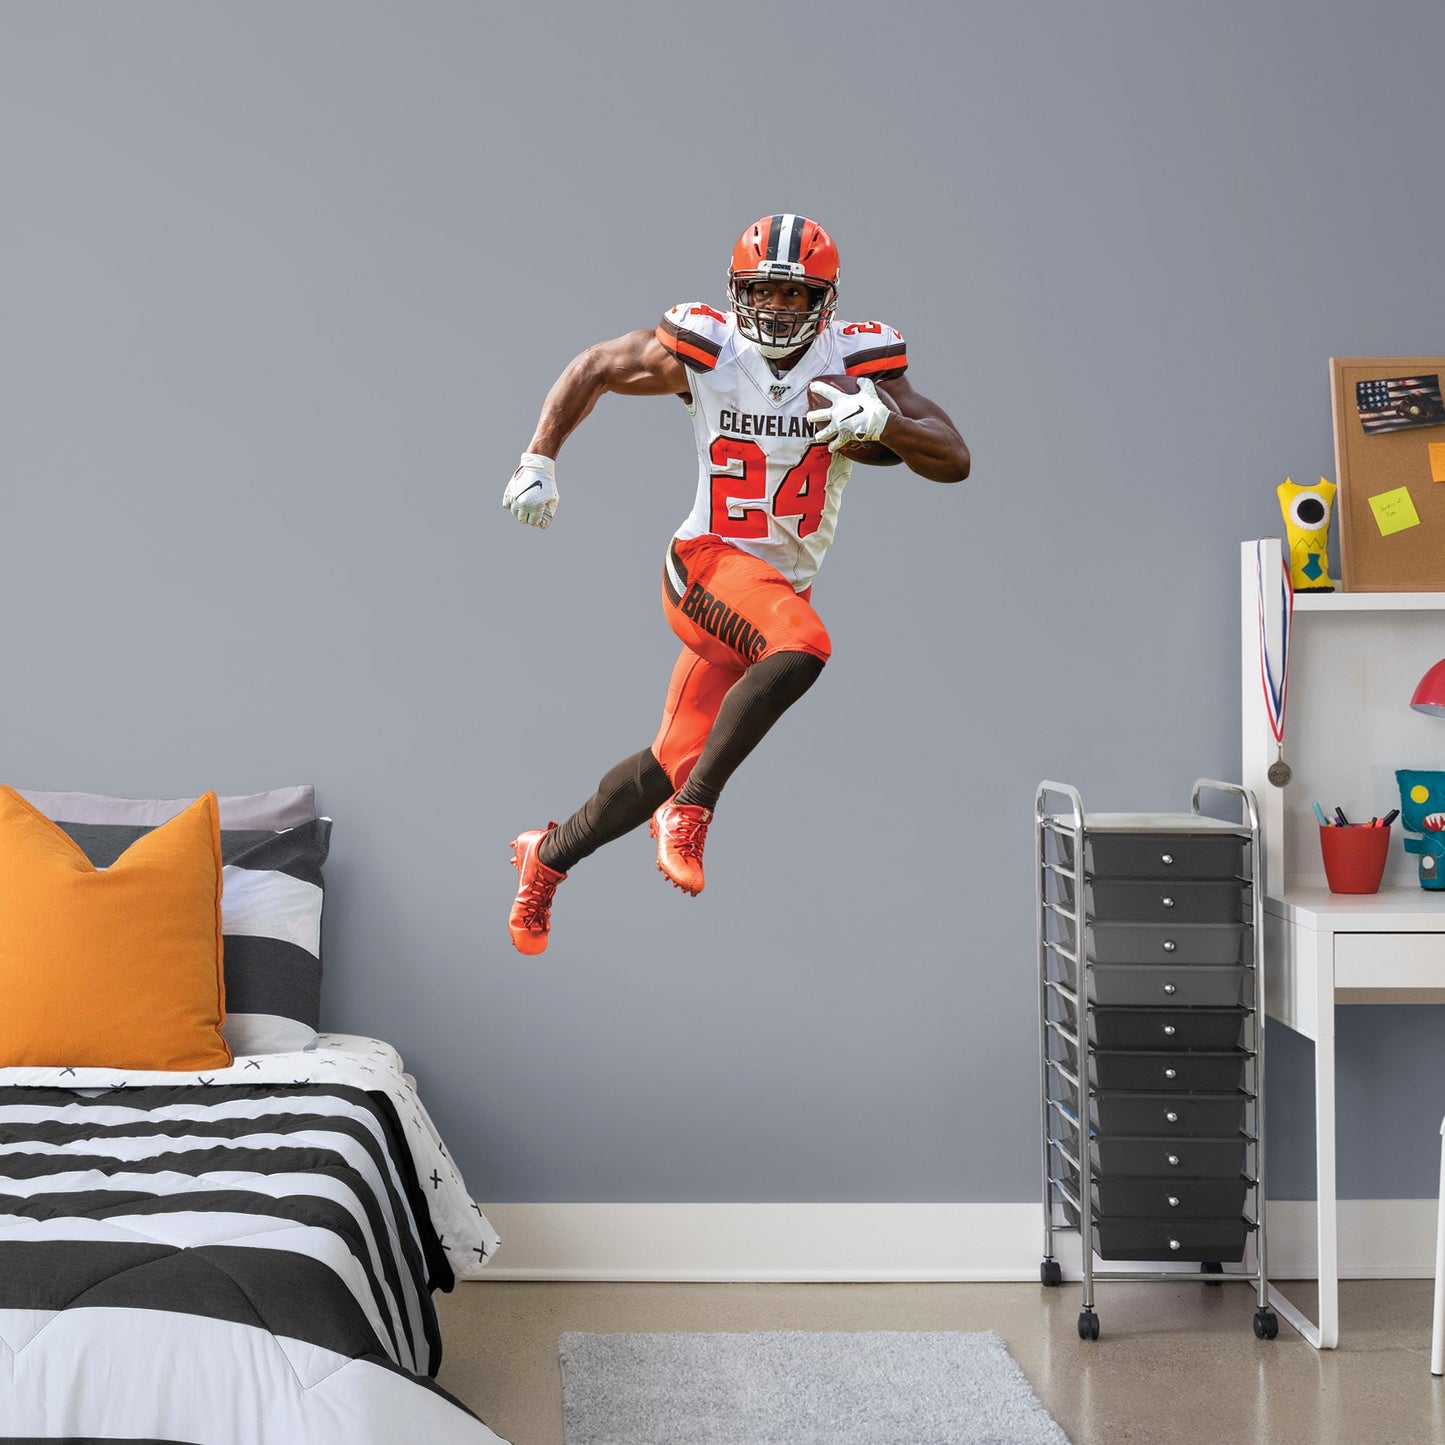 Giant Athlete + 2 Decals (32"W x 51"H) Heir to a Cleveland running back a tradition that includes the legendary Jim Brown, Nick Chubb is the new Browns powerhouse. Blessed with a blend of power, balance, and speed, the man they call Old School is a nightmare for AFC North foes. Now Dawg Pound fans can salute the former Georgia All-American with this removable wall decal collection. The premium vinyl decals are as durable as Chubb himself and ready to charge through a bonus room, bedroom, or dorm. Woof!